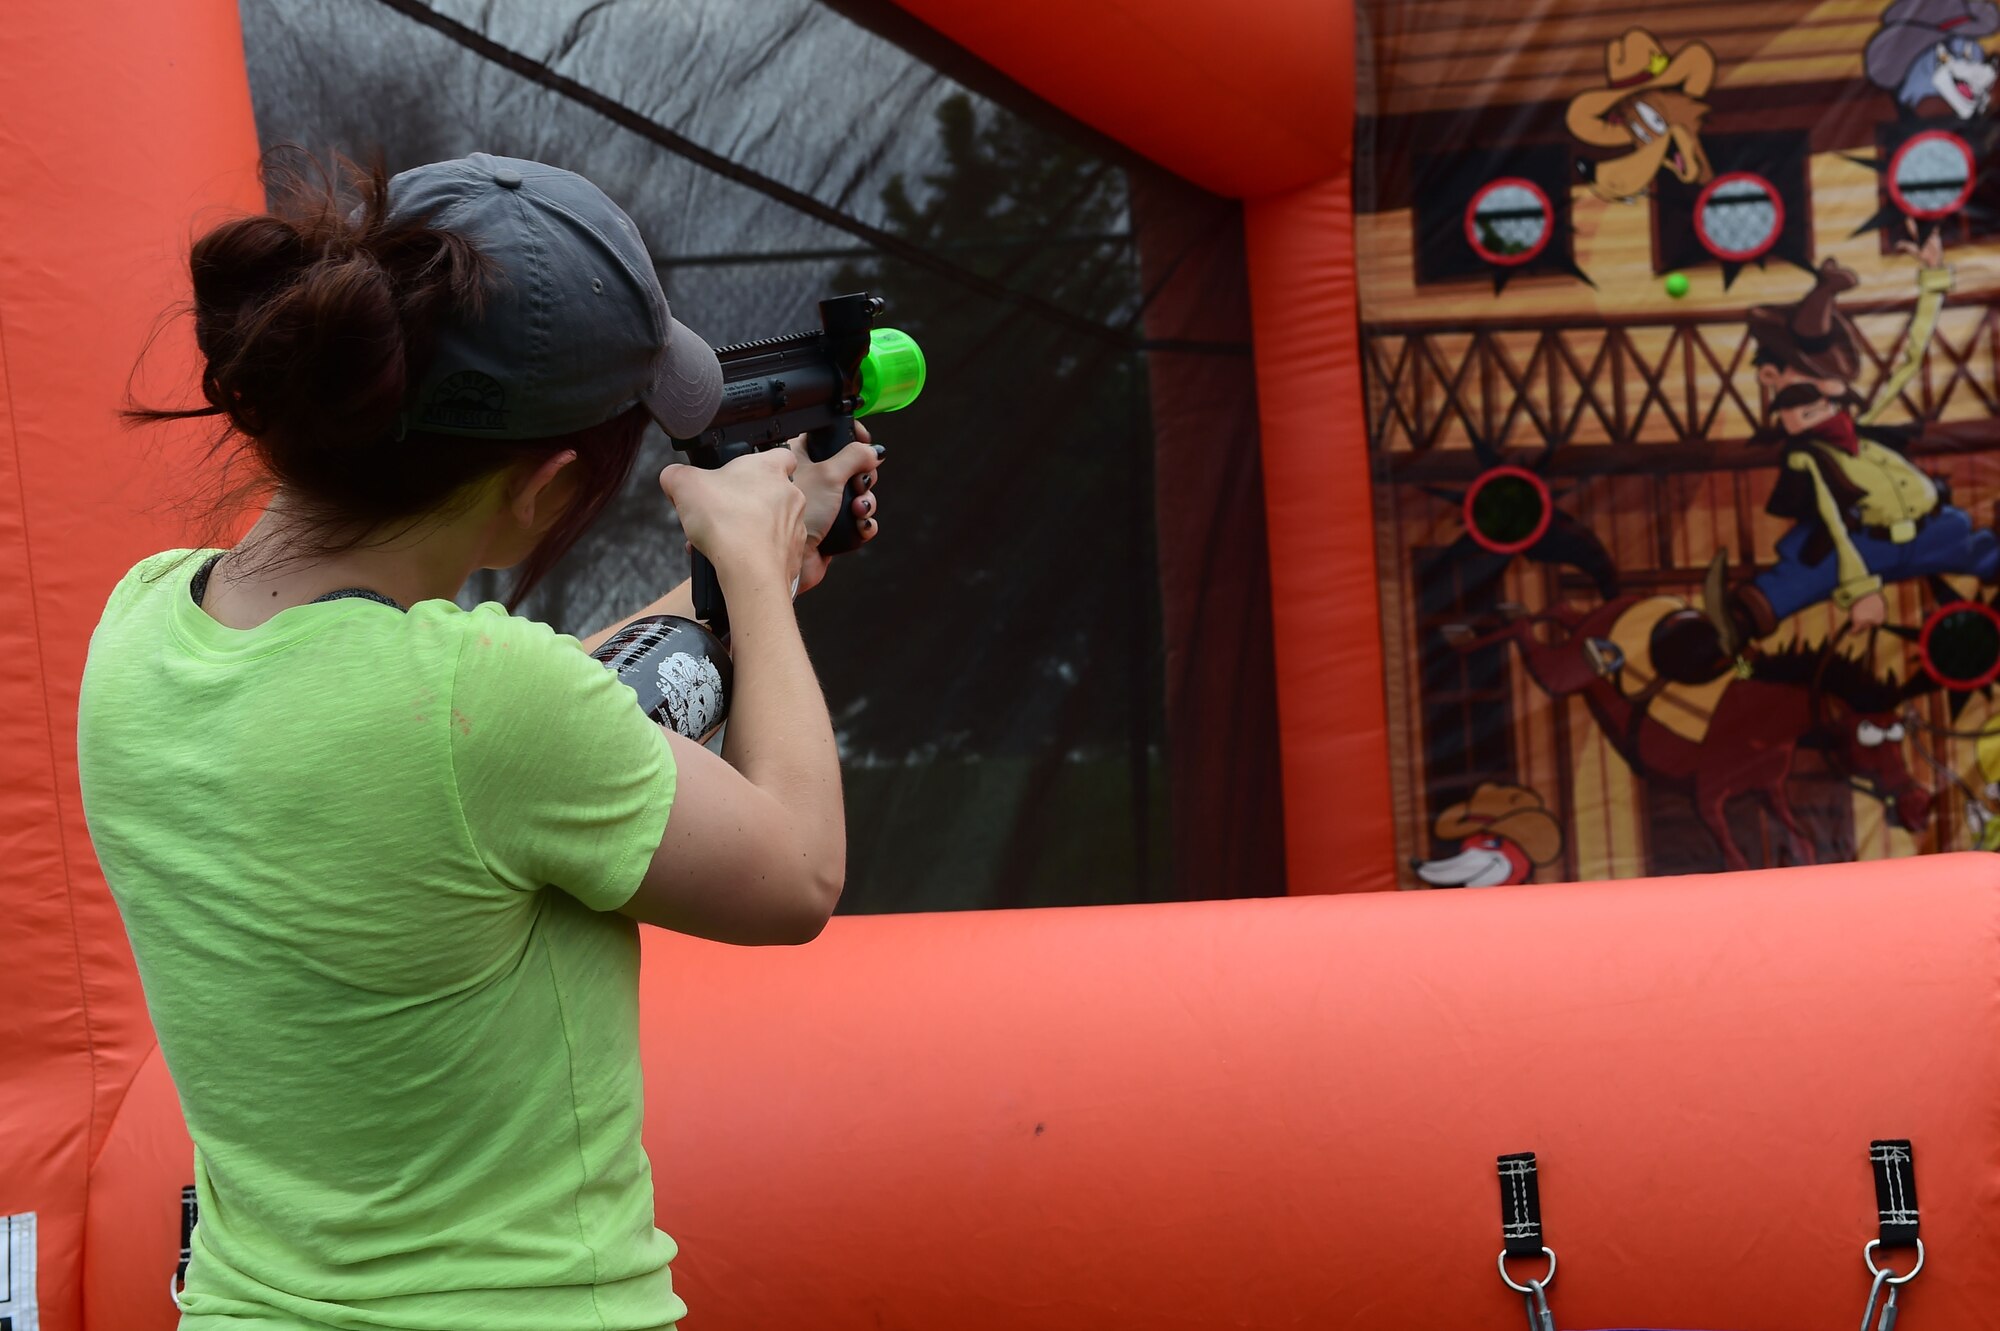 A girl takes aim at targets during FunFest July 24, 2015, at Buckley Air Force Base, Colo. FunFest is an annual base-wide event that includes family- friendly games and activities, community involvement and local business sponsors. (U.S. Air Force photo by Airman 1st Class Luke W. Nowakowski/Released)